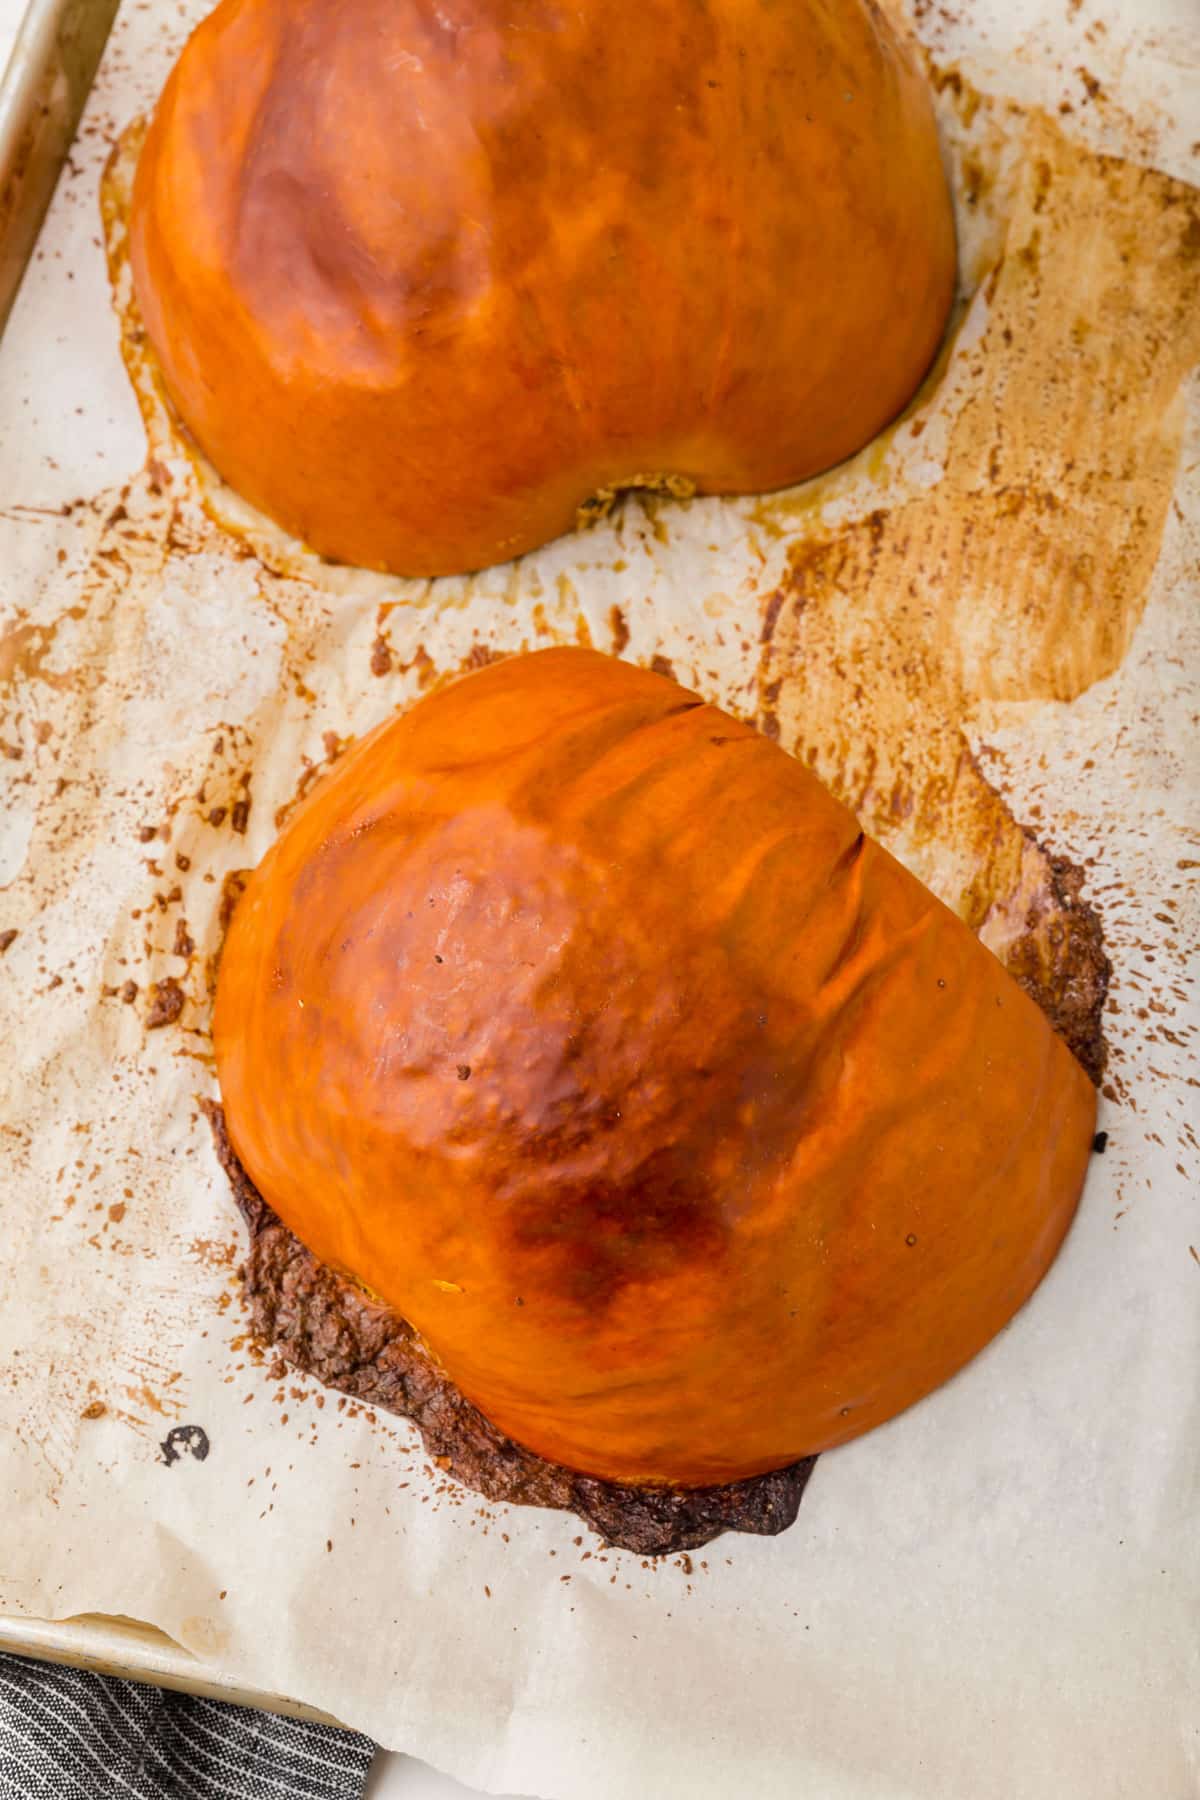 A sheet pan lined with parchment paper with two roasted pumpkin halves on it.